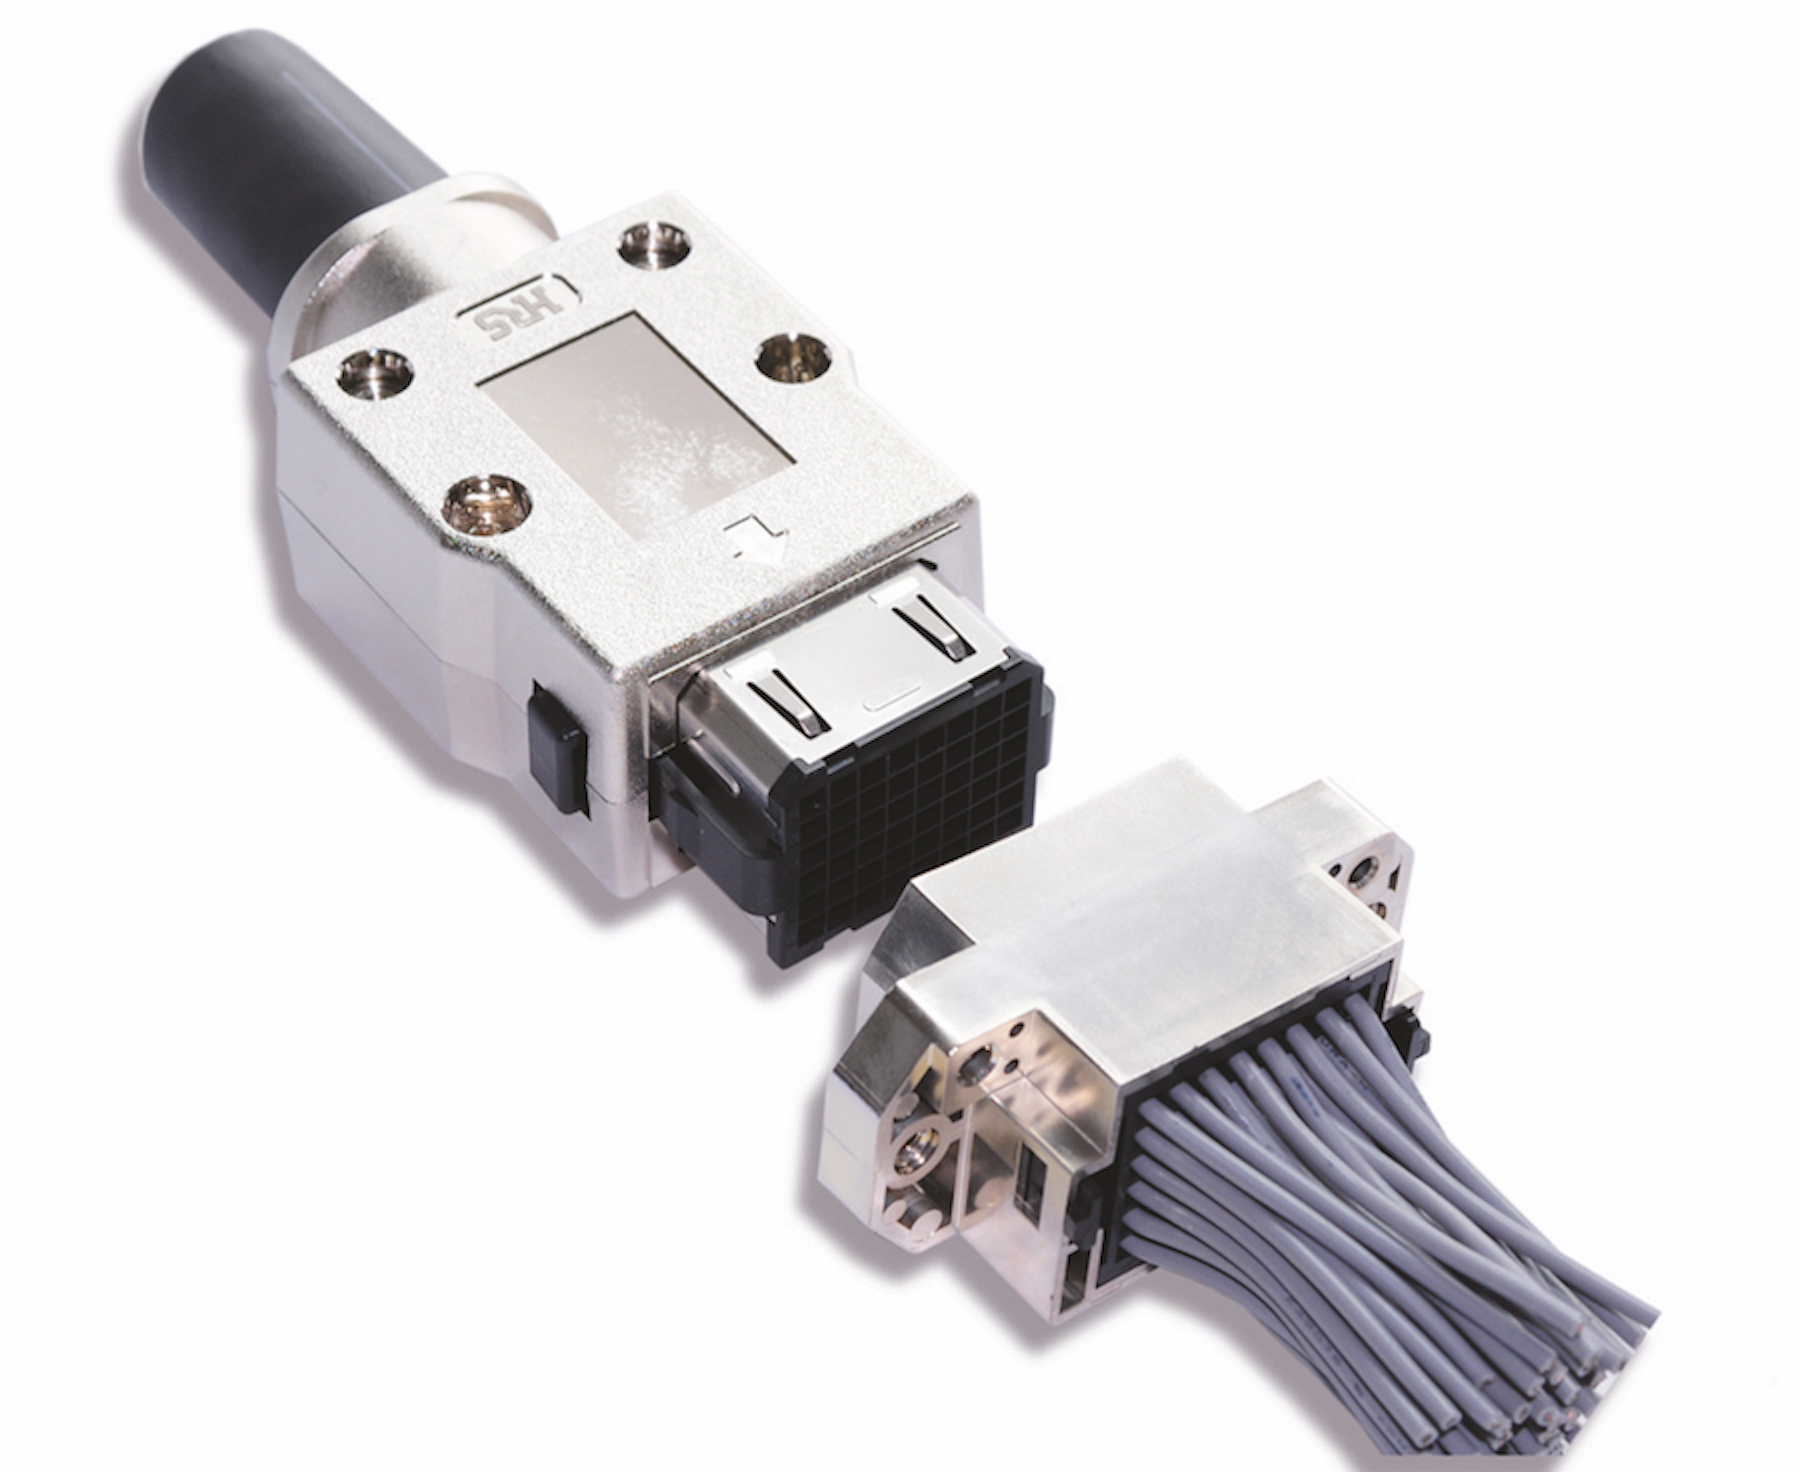 Rugged High-Power Connector for Industrial Environments